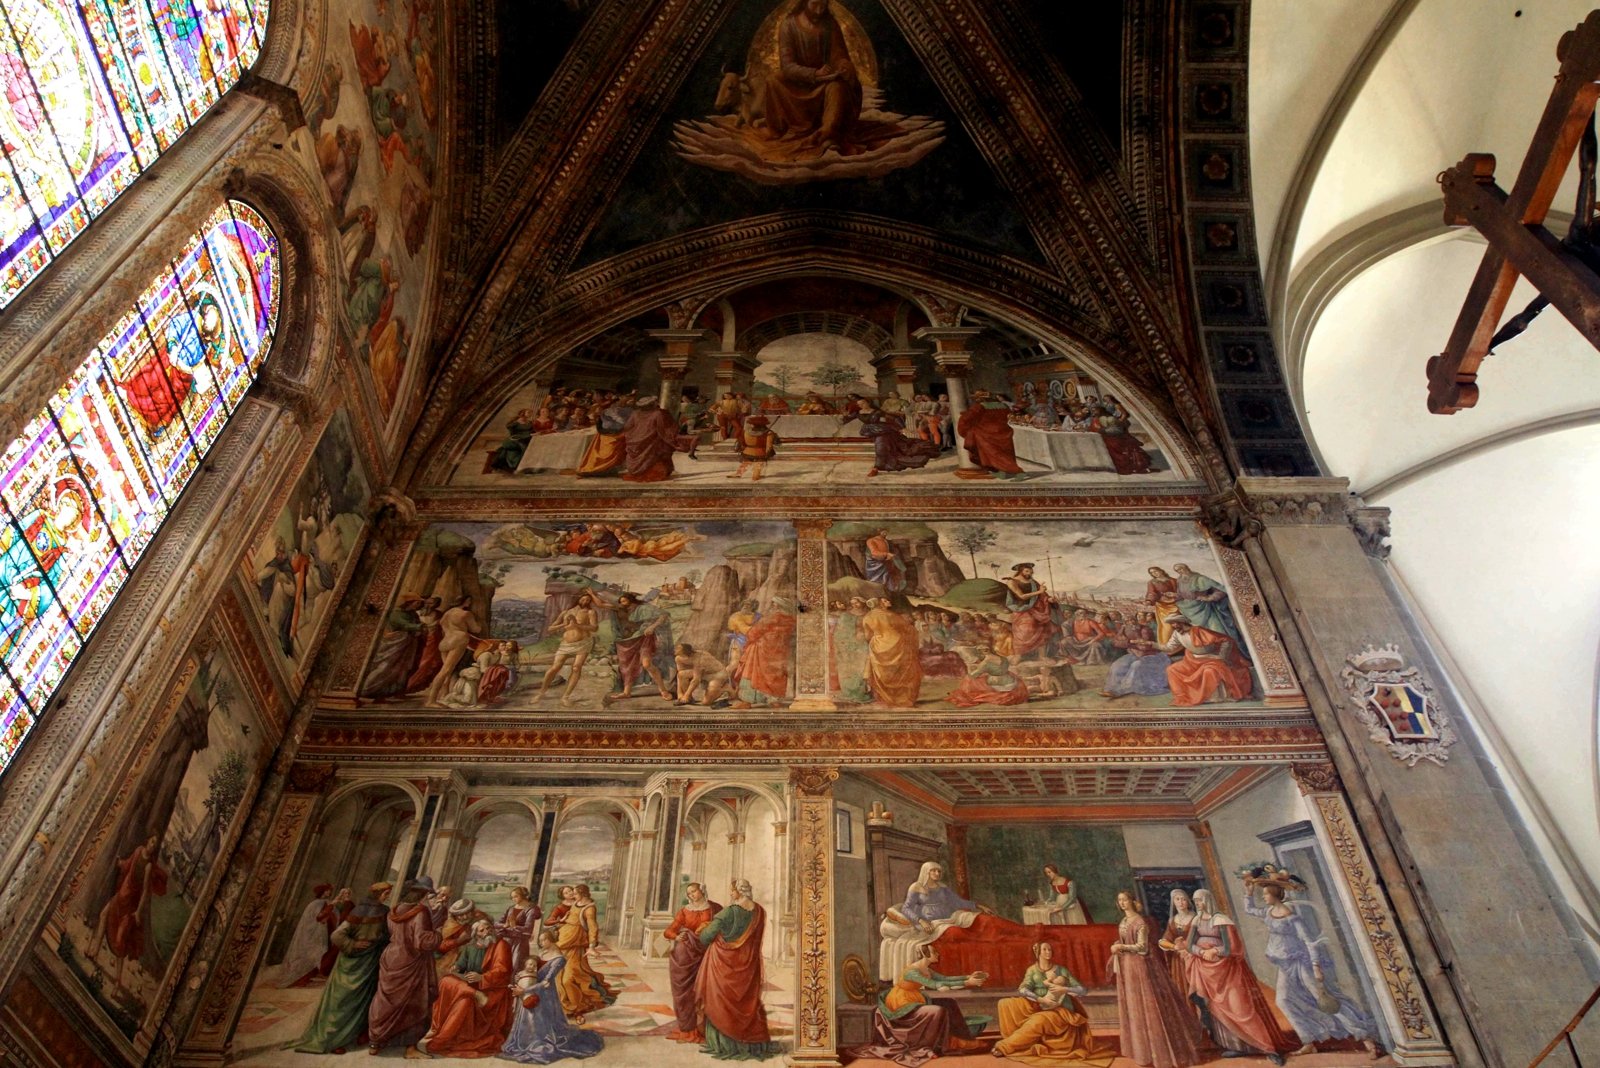 How to look at the frescoes in the church of Santa Maria Novella in Florence